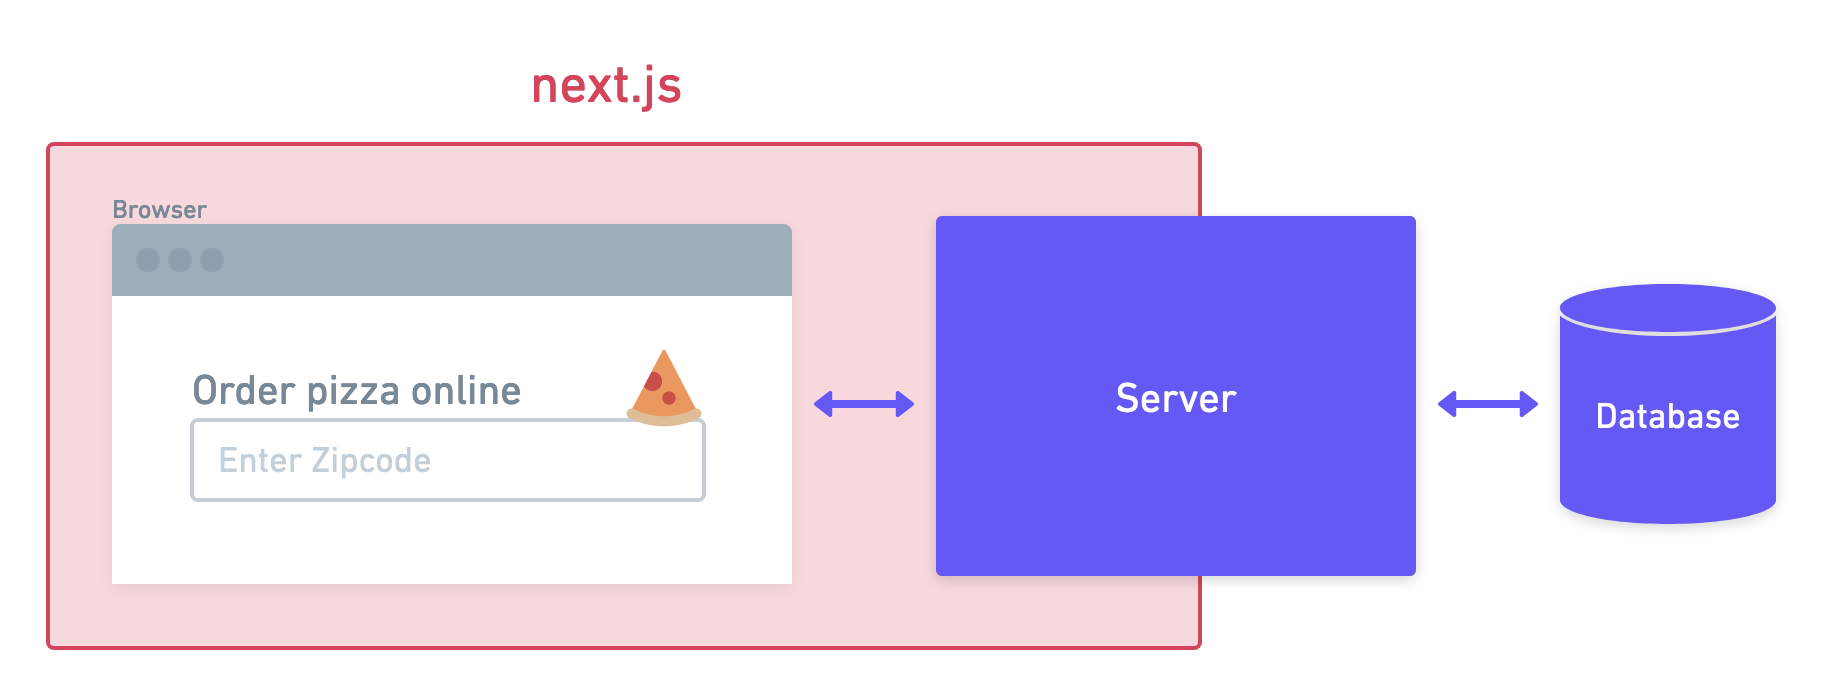 Diagram of a browser, server and database including a box surrounding the browser and half of the server, indicating that this is the part that next.js takes care of.